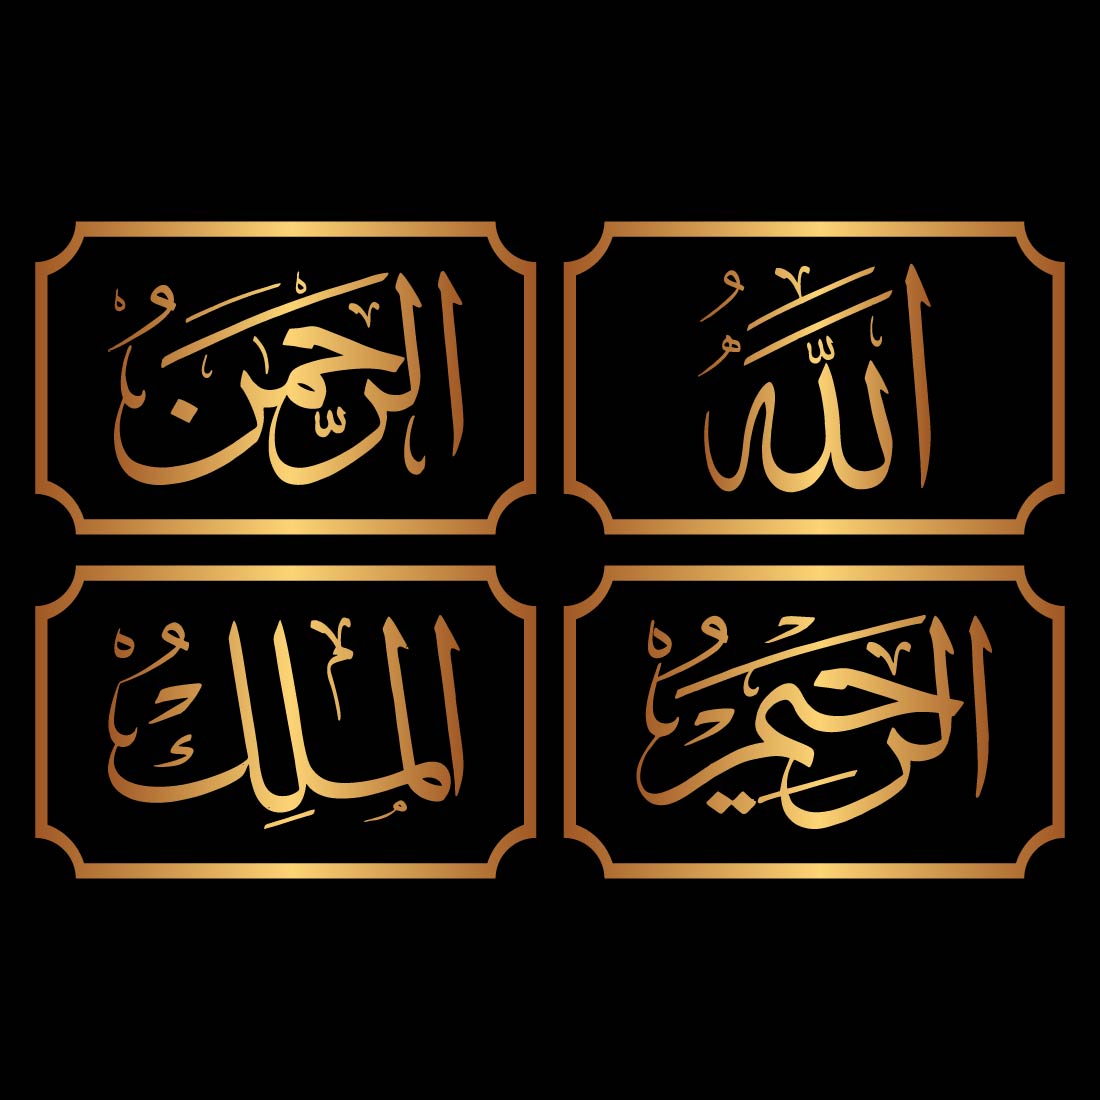 ALLAH'S 100 NAMES vector art for $7 only cover image.